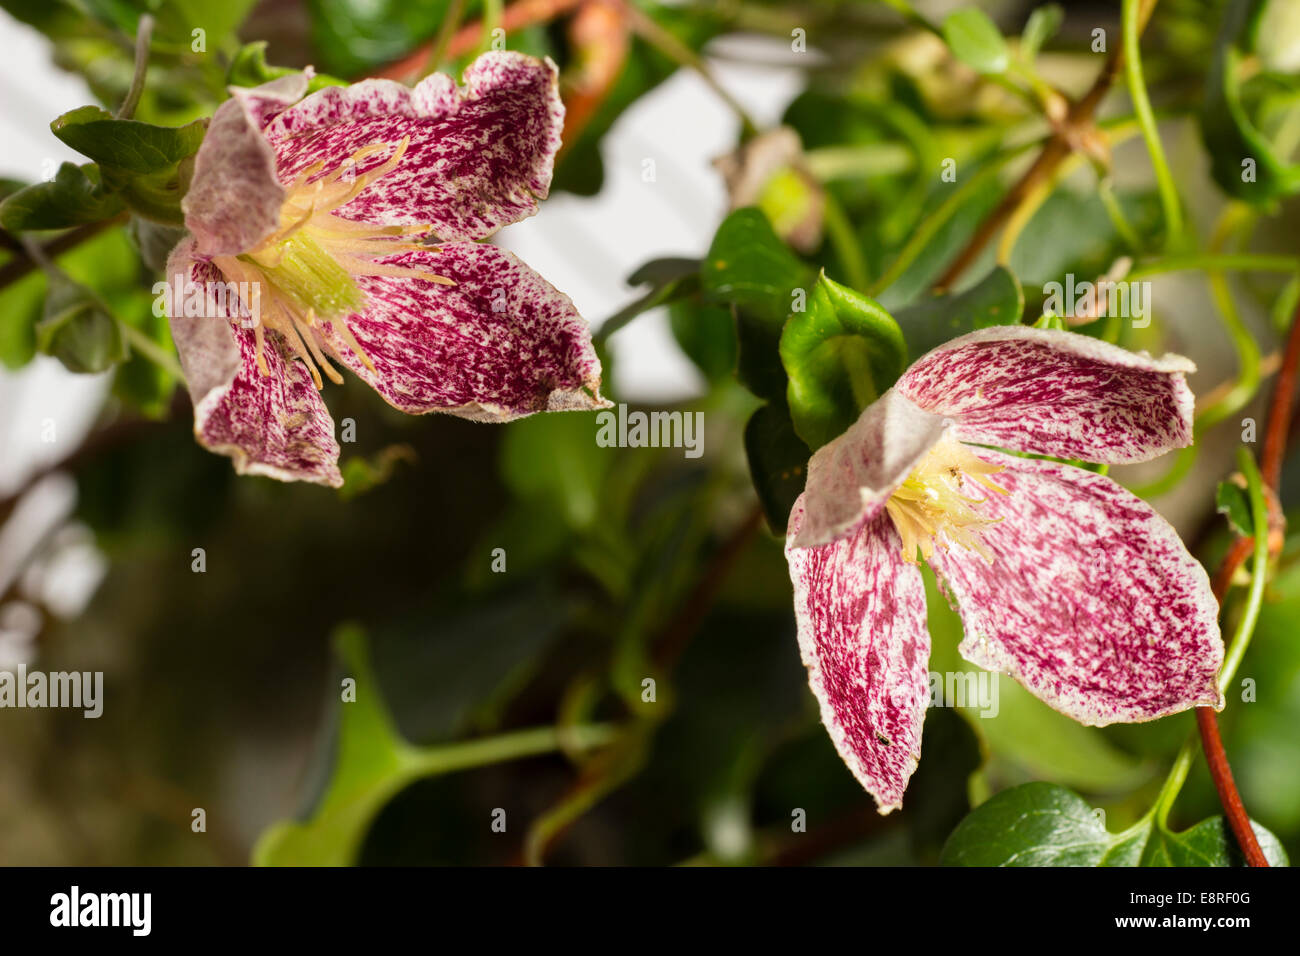 Flowers of the autumn and winter flowering Clematis cirrhosa var. purpurascens 'Freckles' Stock Photo